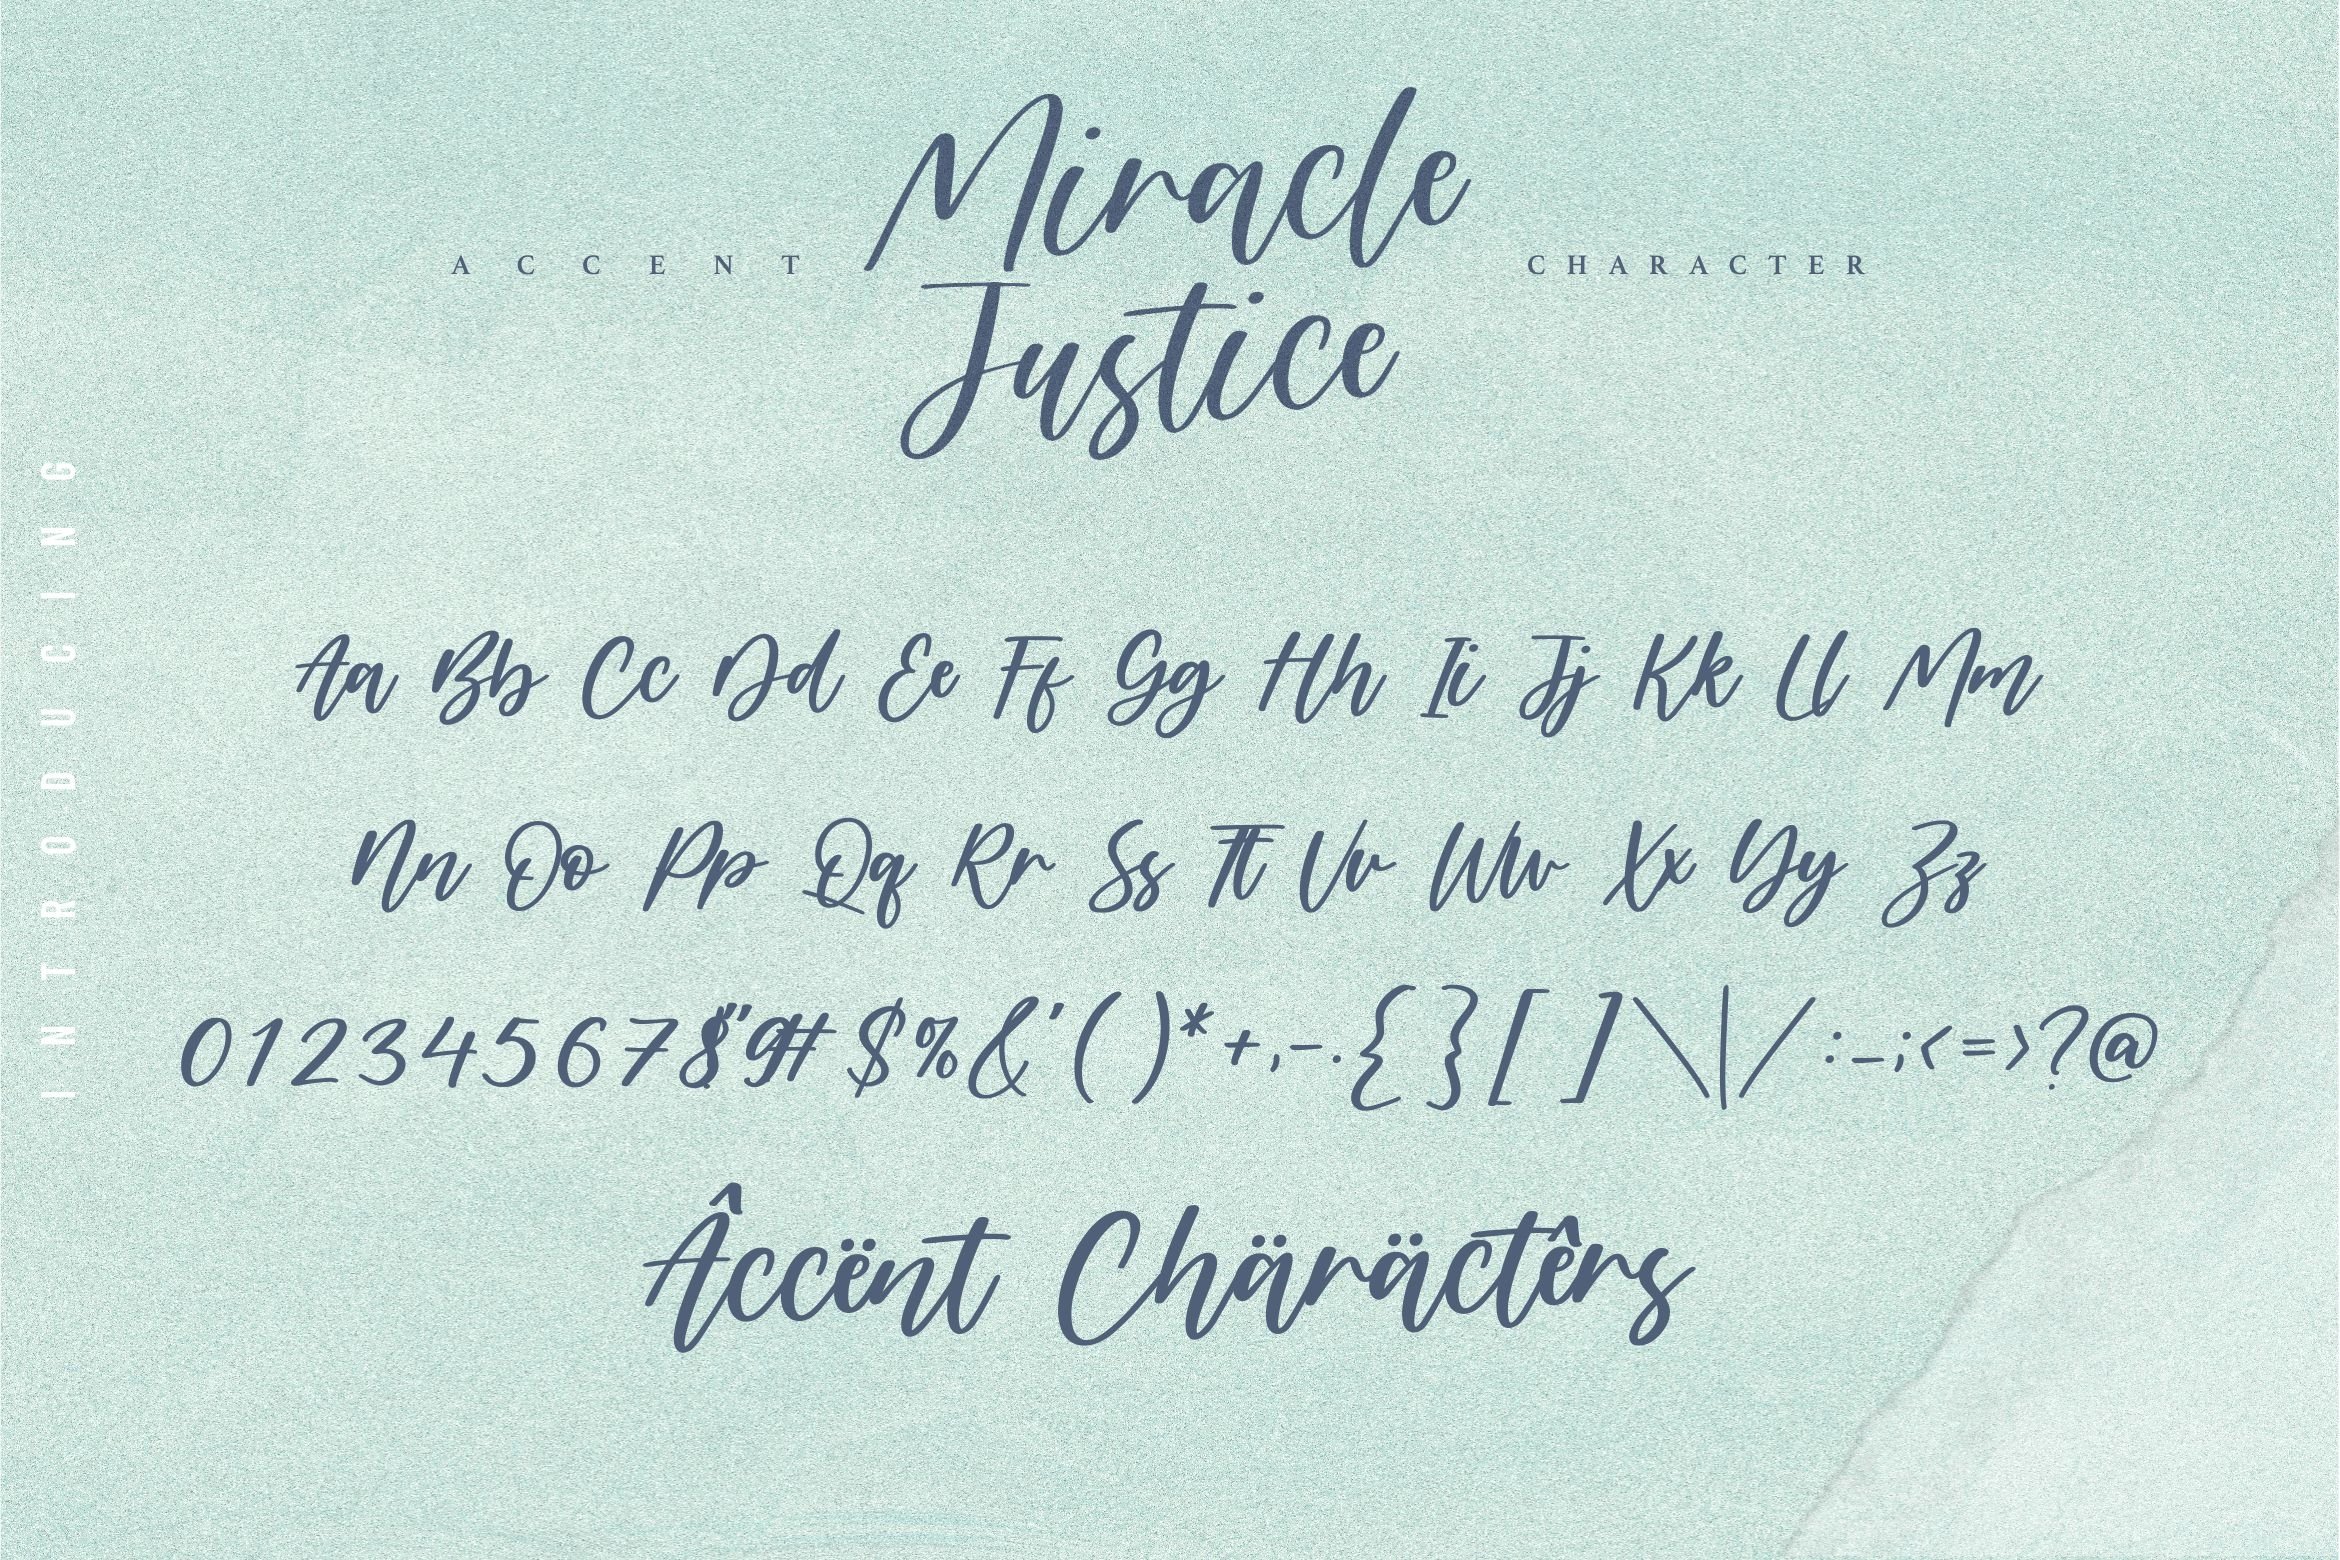 Miracle Justice6